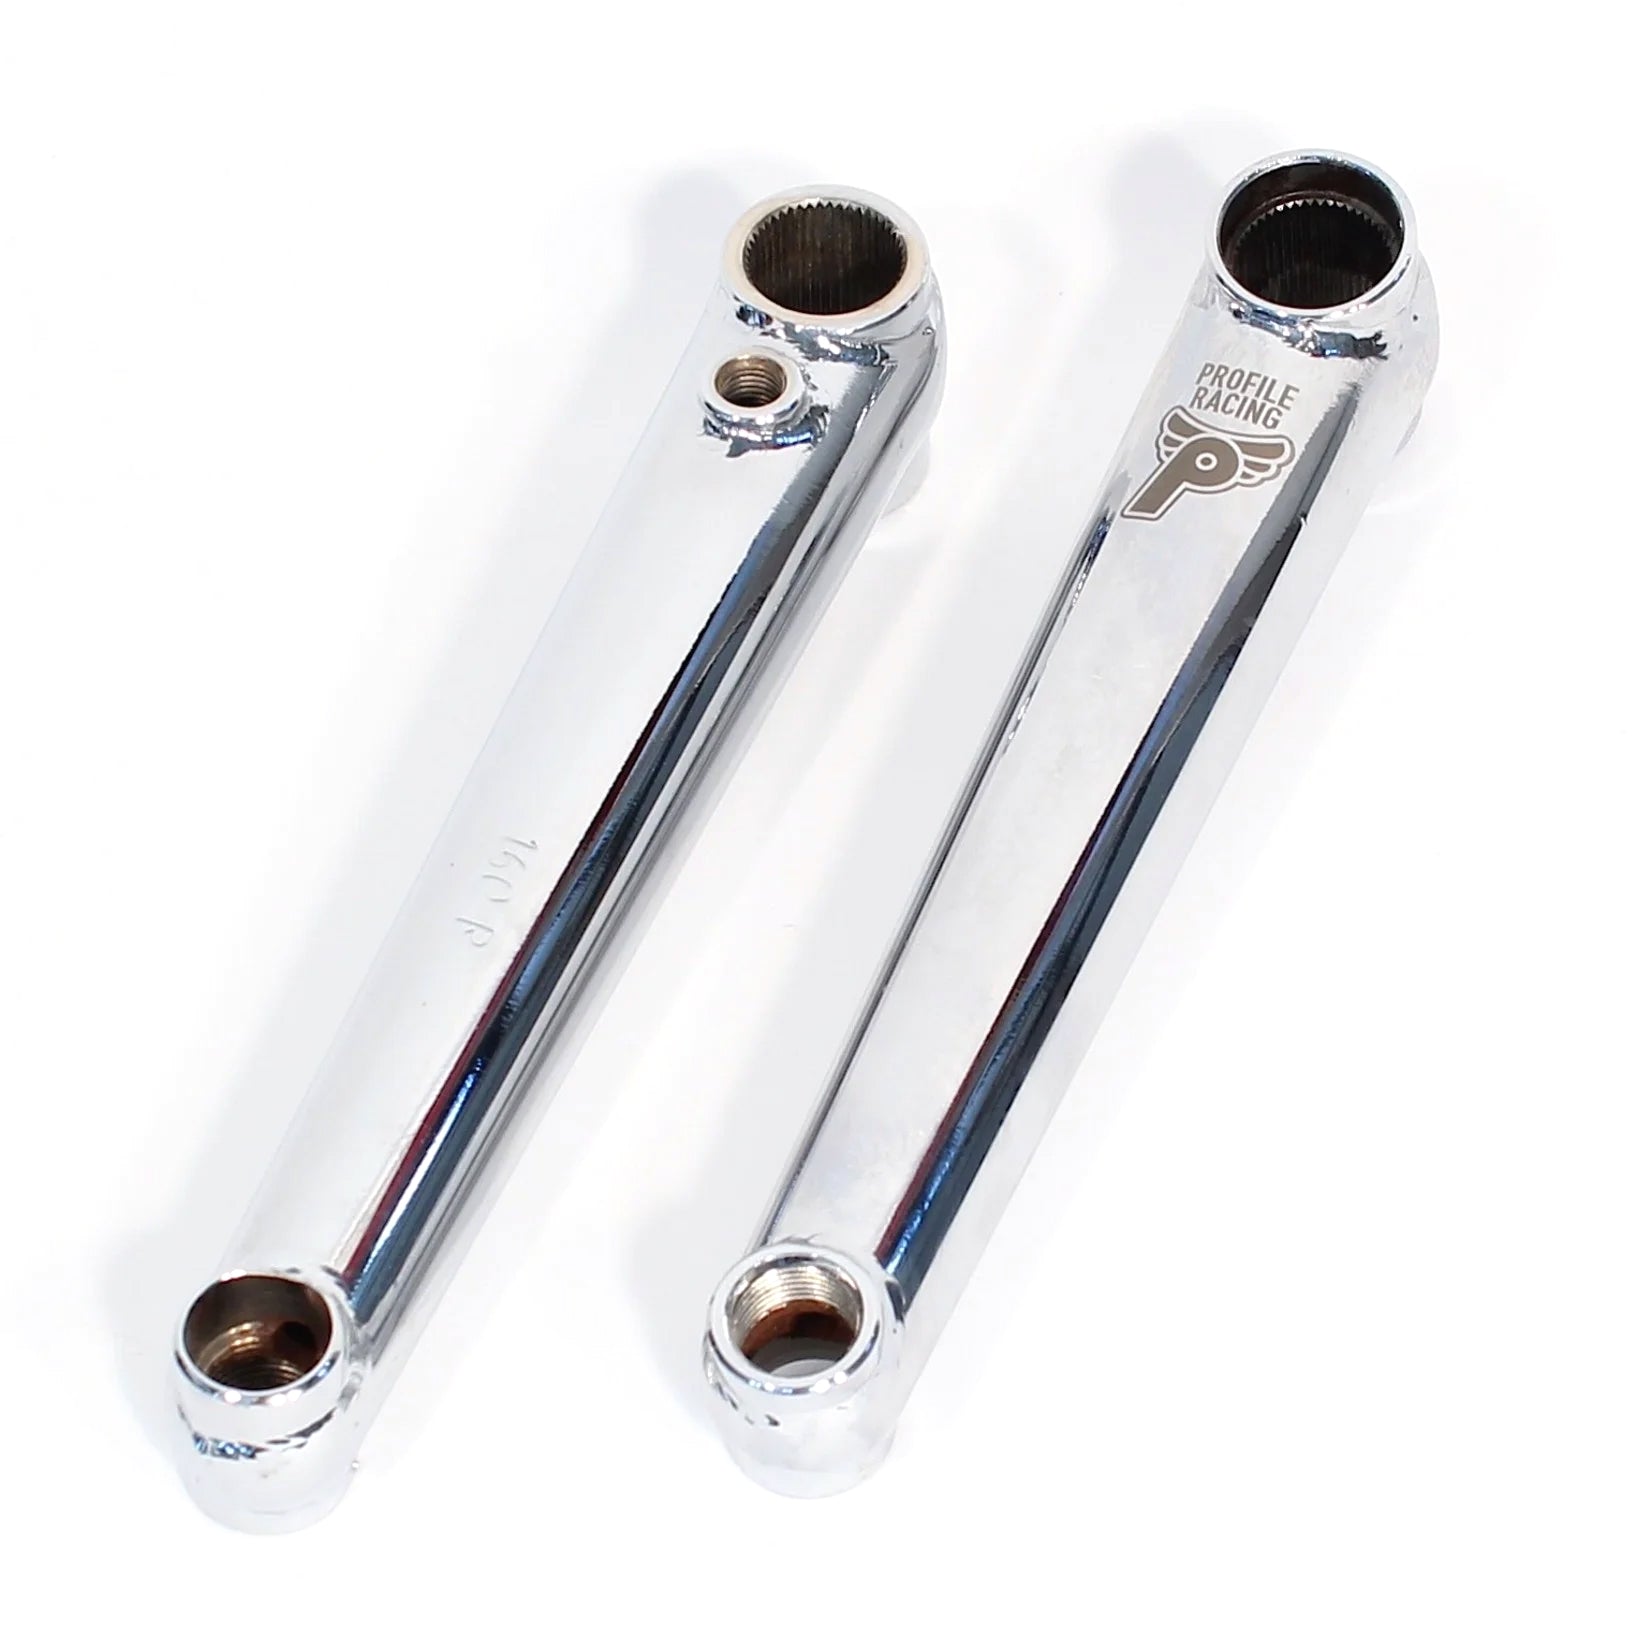 Two shiny chrome Profile Race Cranks with 12-point sockets and a 48 spline spindle, isolated on a white background.